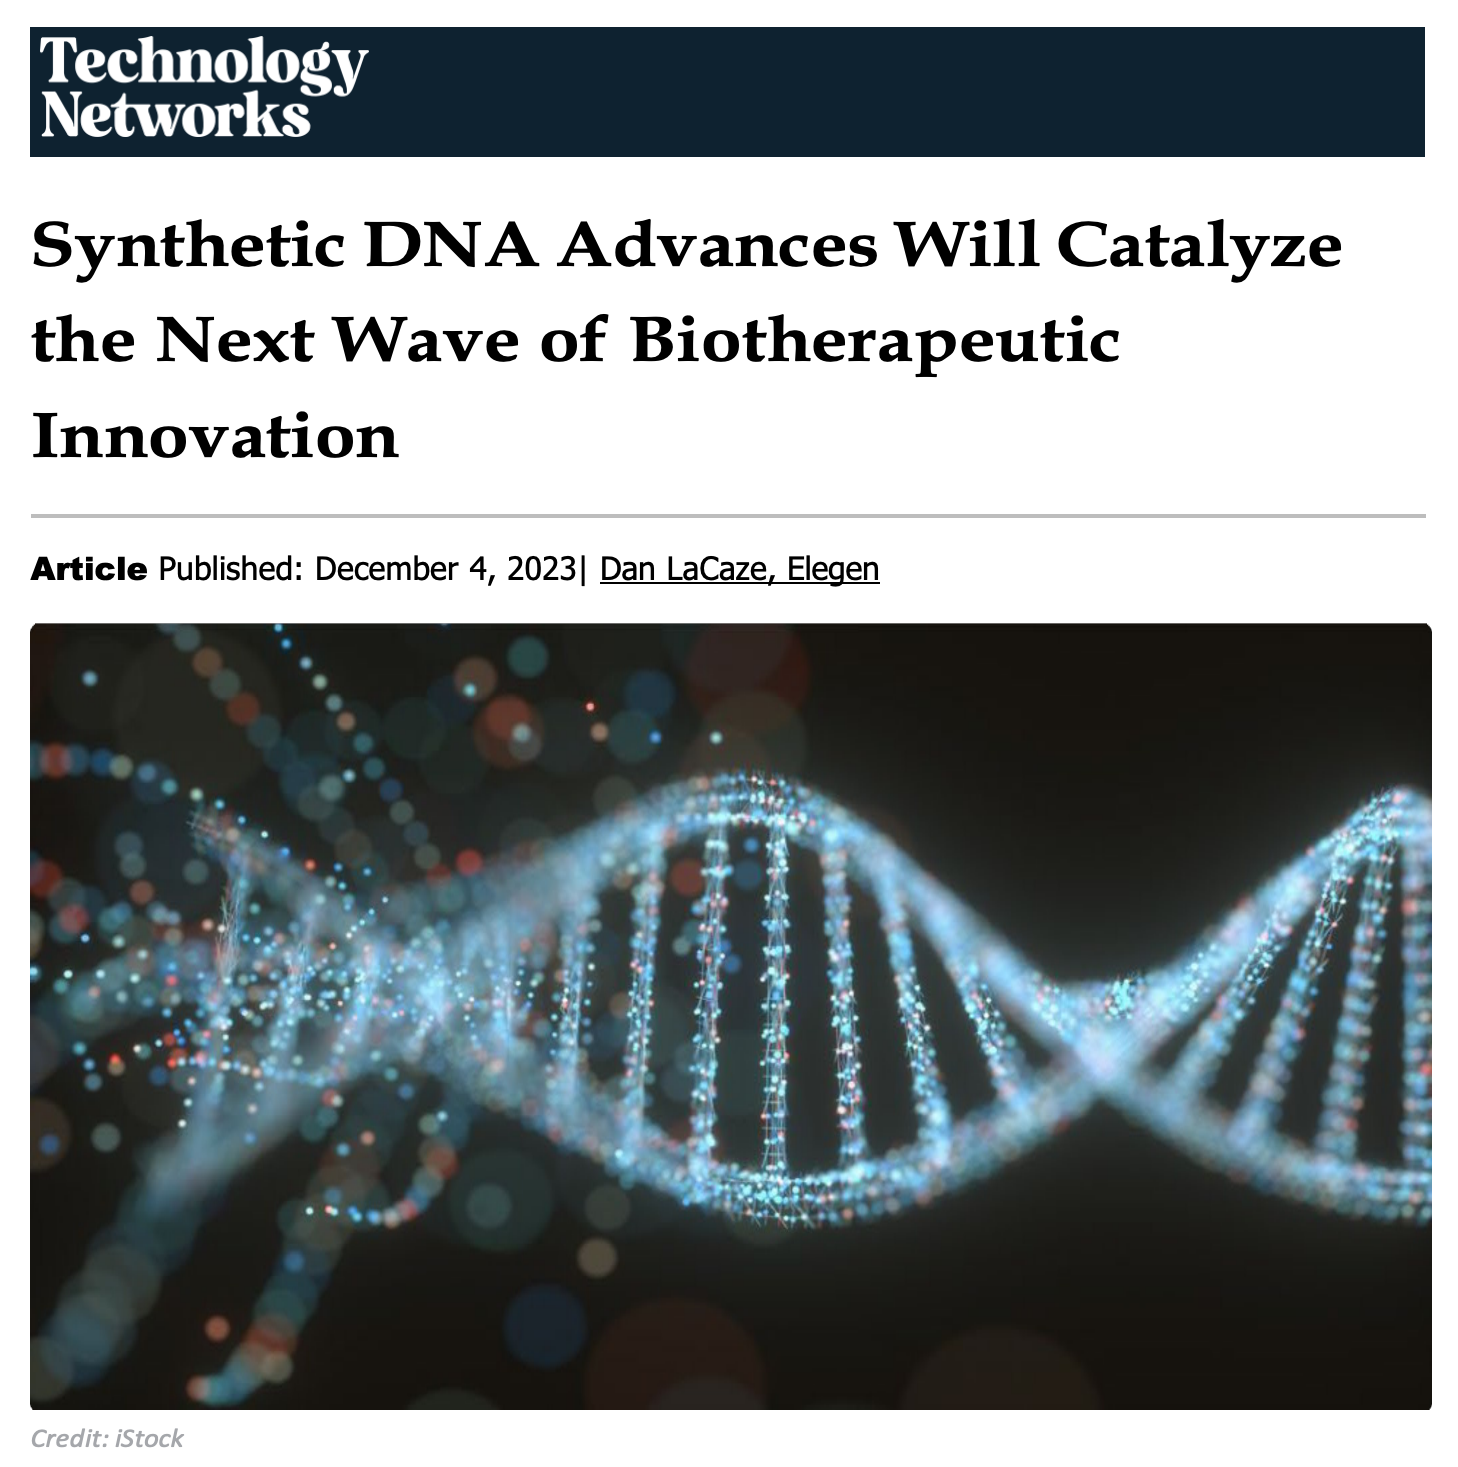 thumb-Synthetic-DNA-Advances-Will-Catalyze-the-Next-Wave-of-Biotheapeutic-Innovation